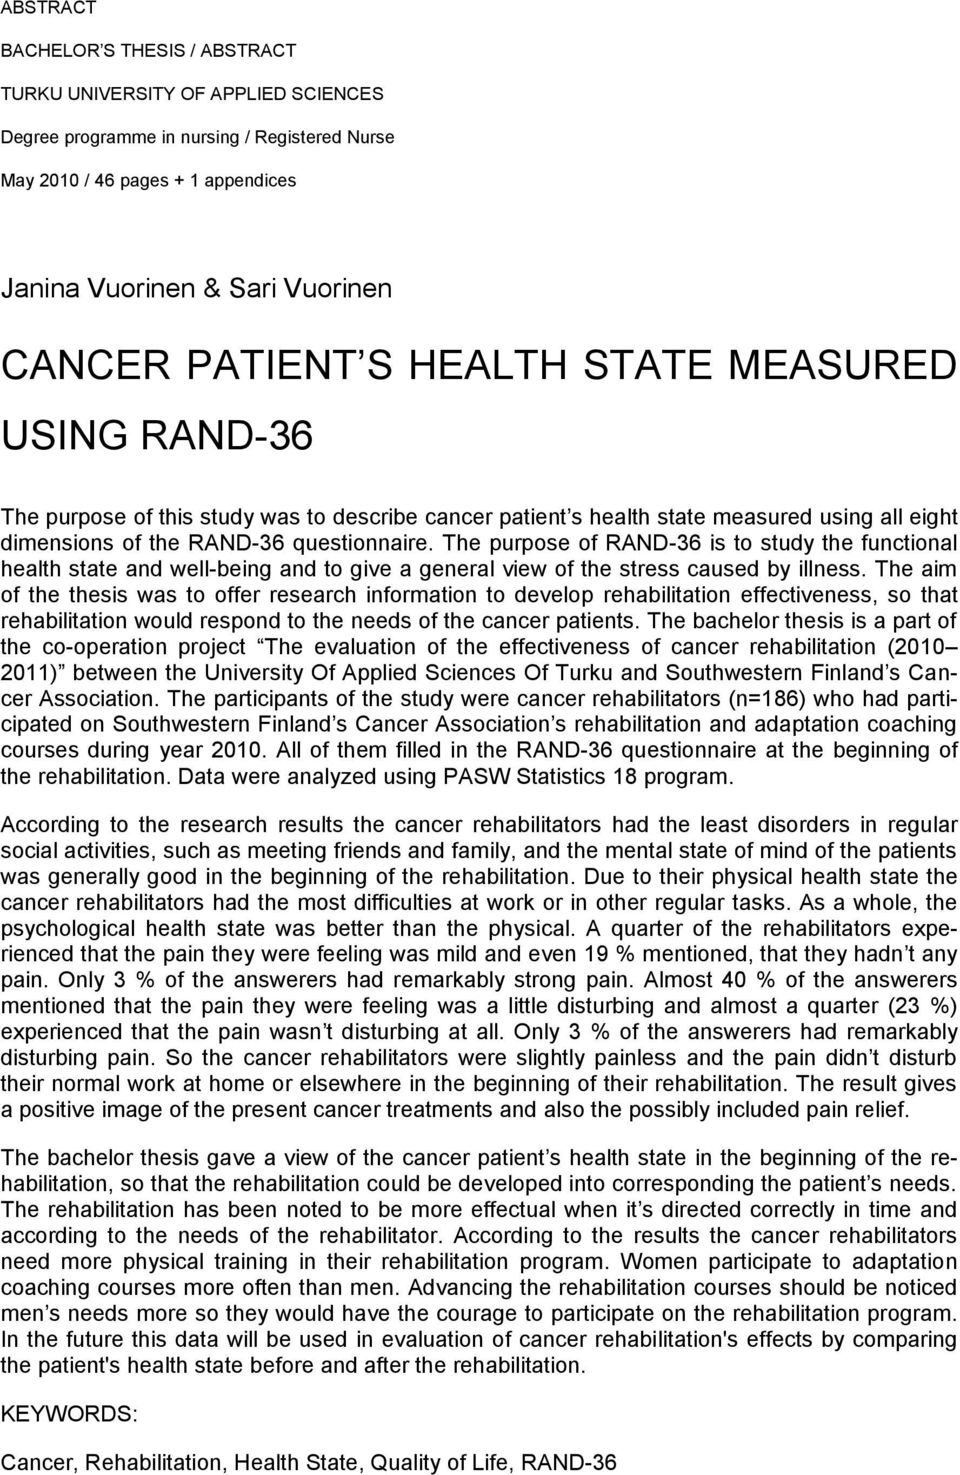 The purpose of RAND-36 is to study the functional health state and well-being and to give a general view of the stress caused by illness.